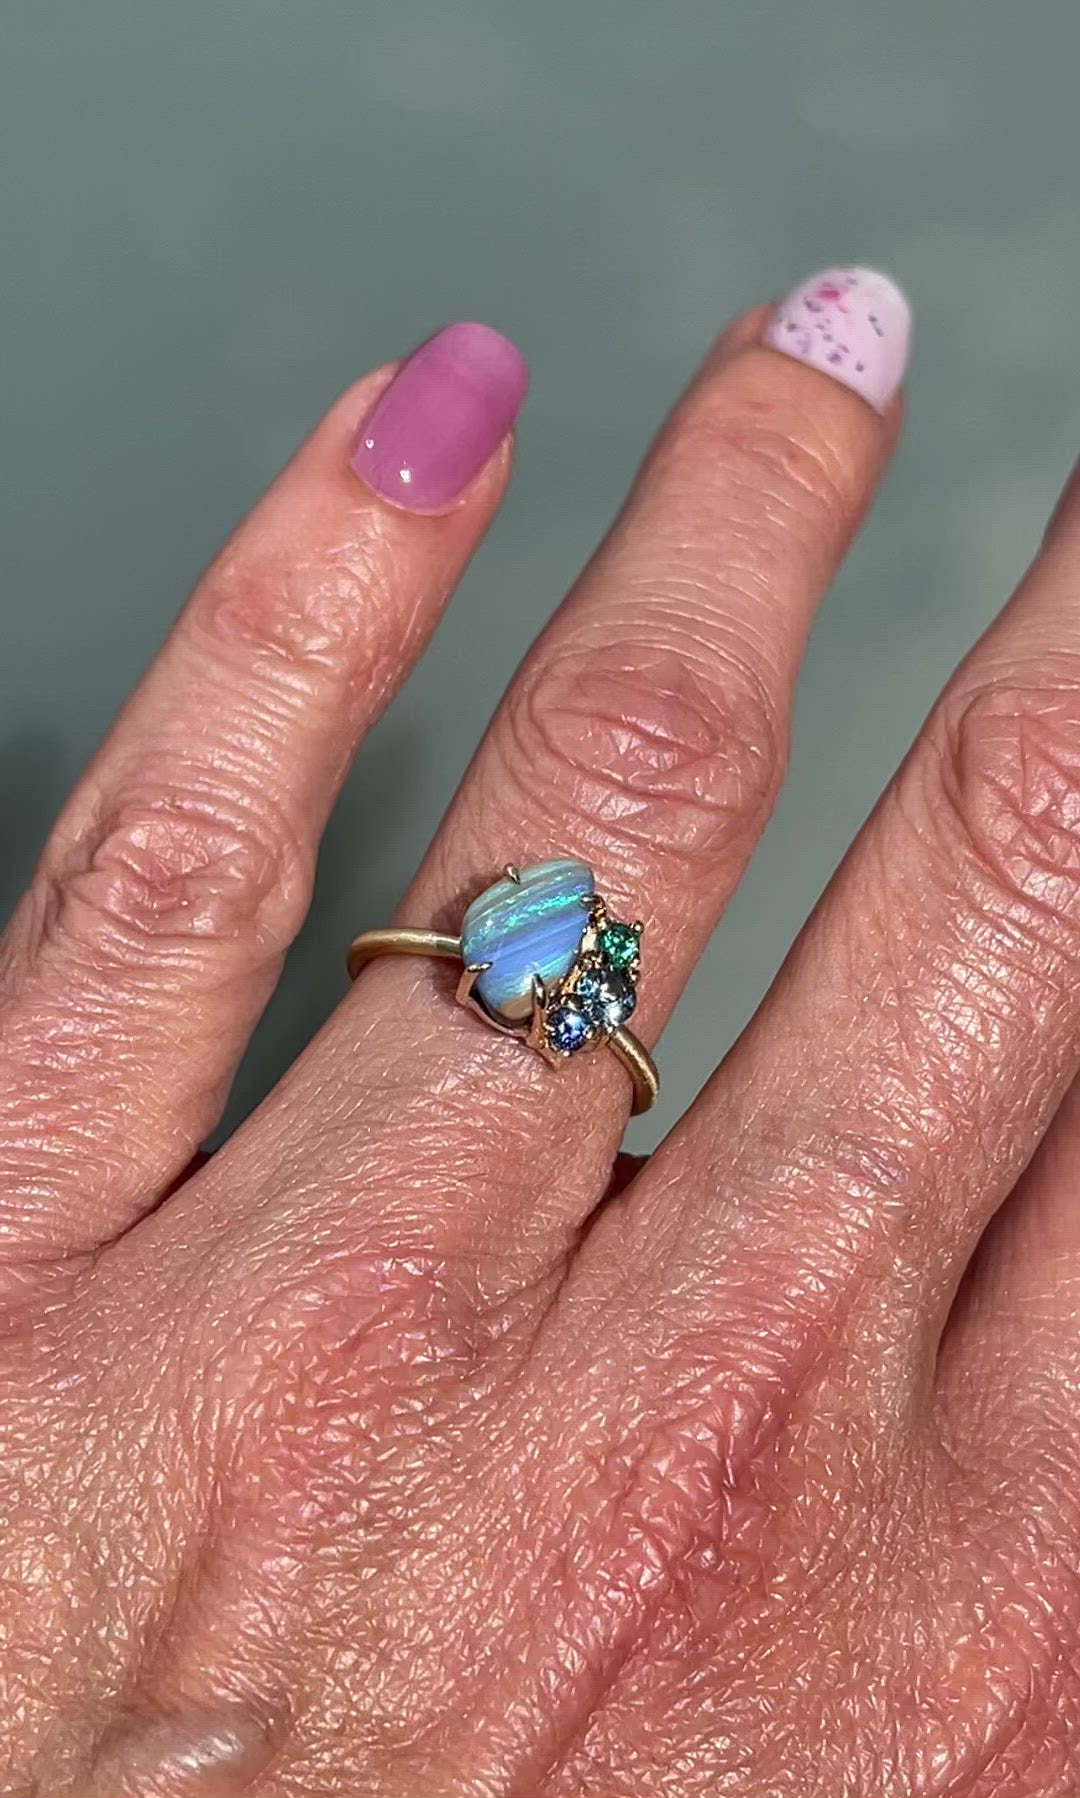 Video of Emerald and Opal Ring by NIXIN Jewelry. Australian opal ring with gemstones modeled on hand.